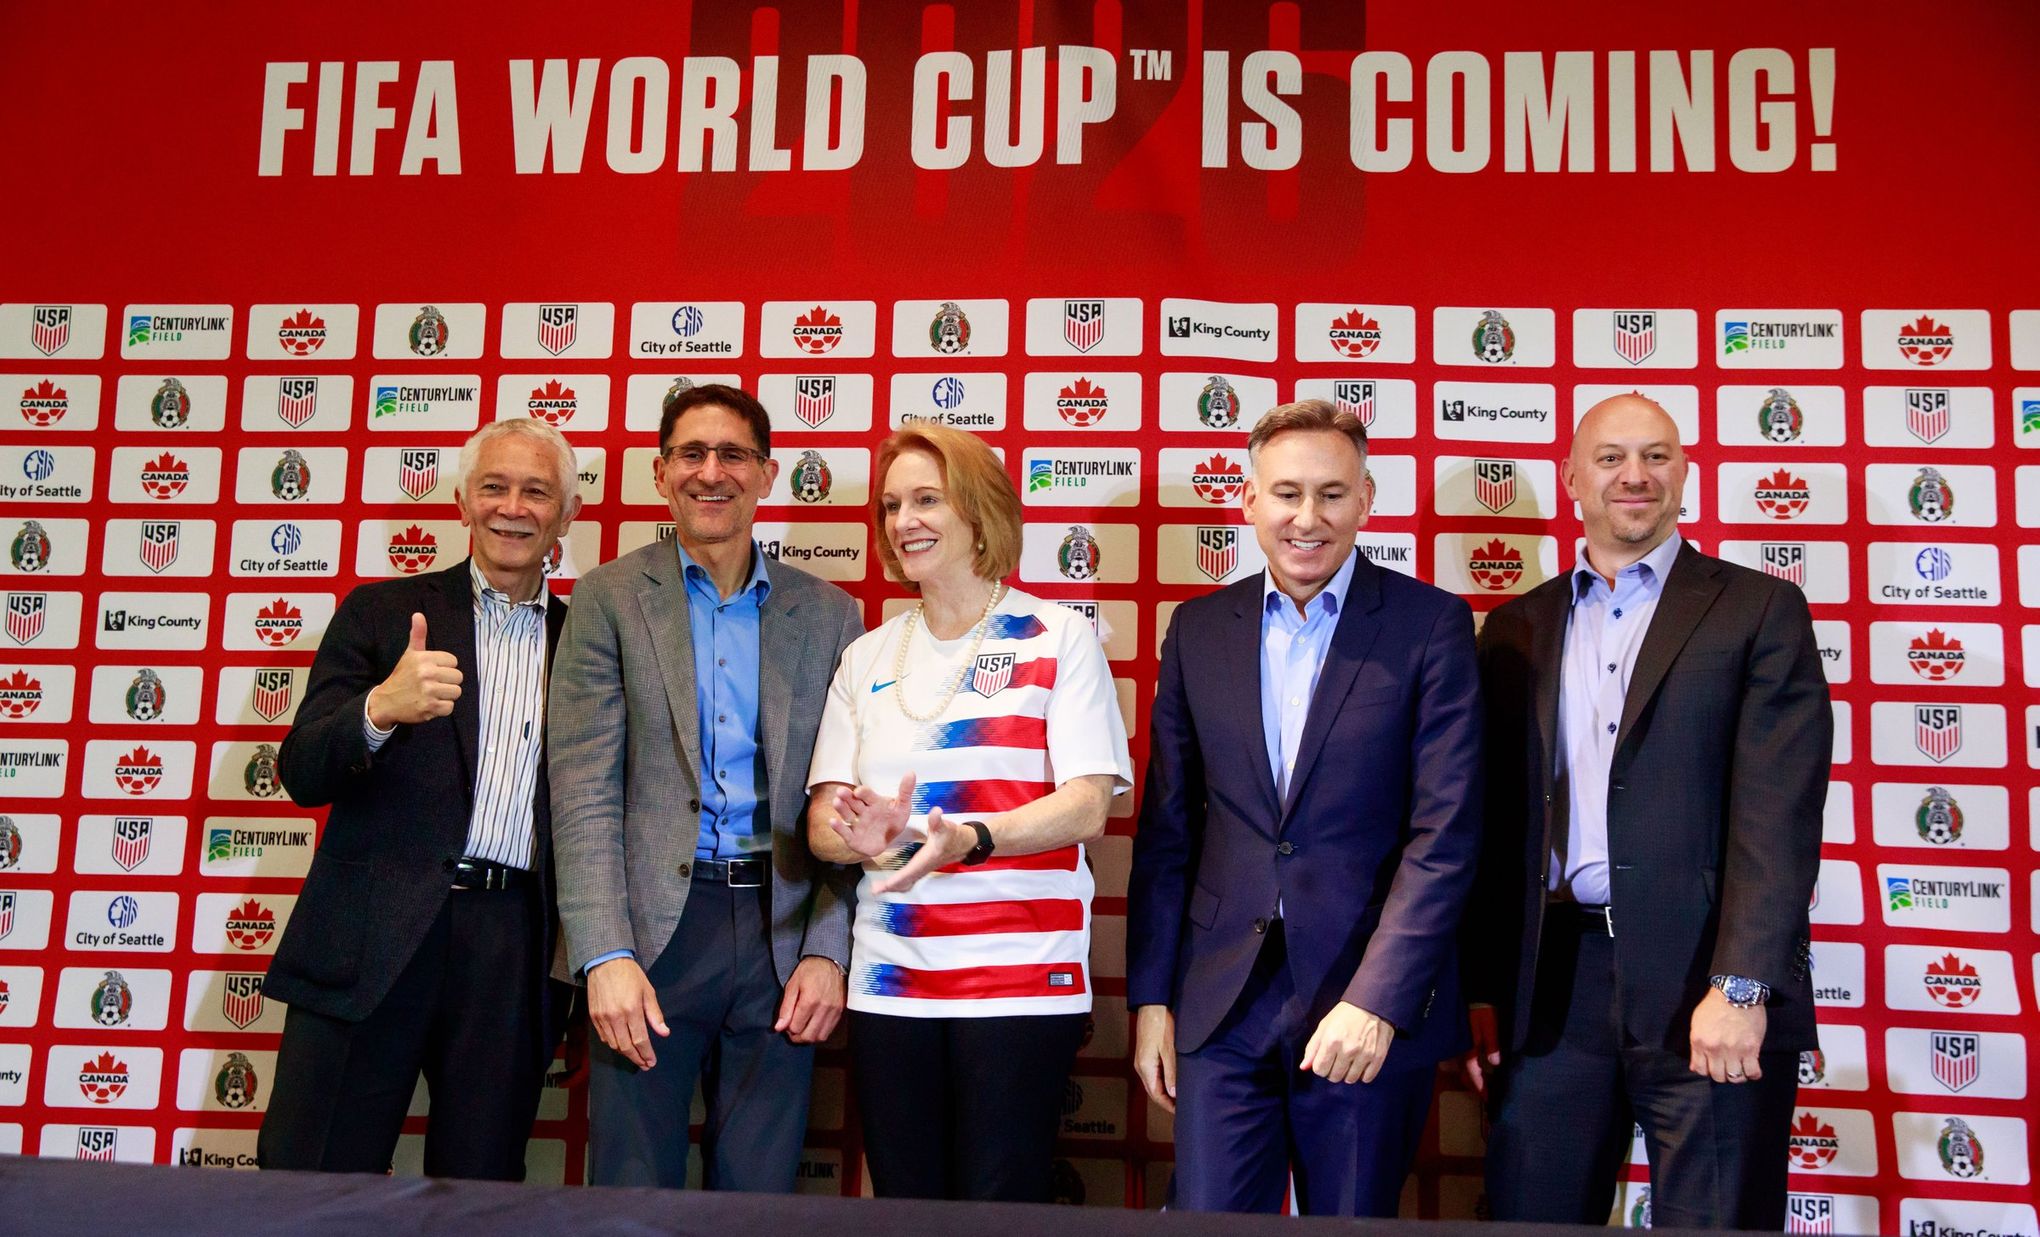 The World Cup is coming to Gillette in 2026